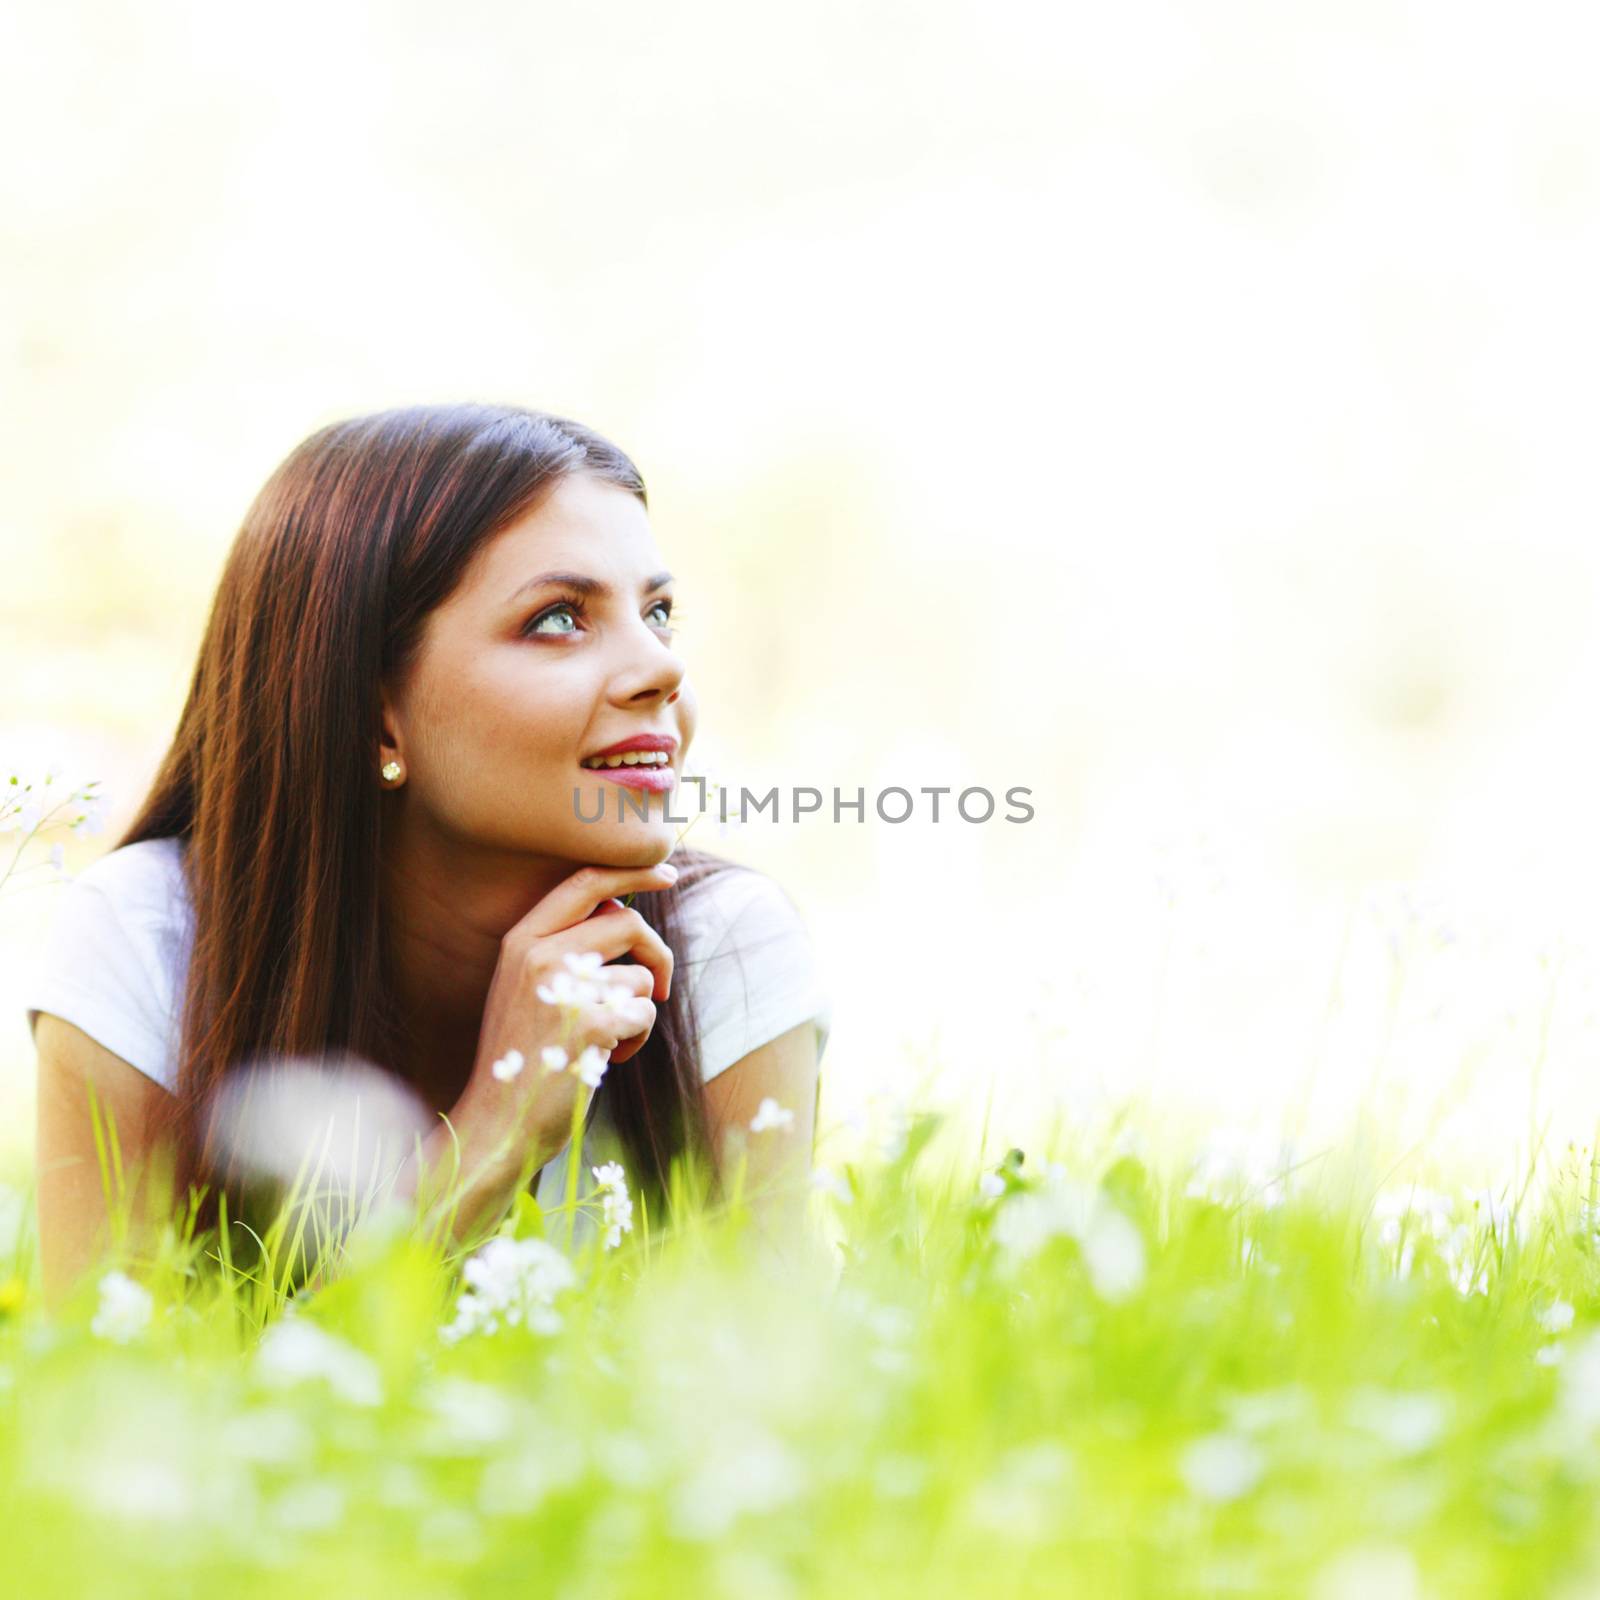 Pretty brunette girl laying on grass with white  flowers around her